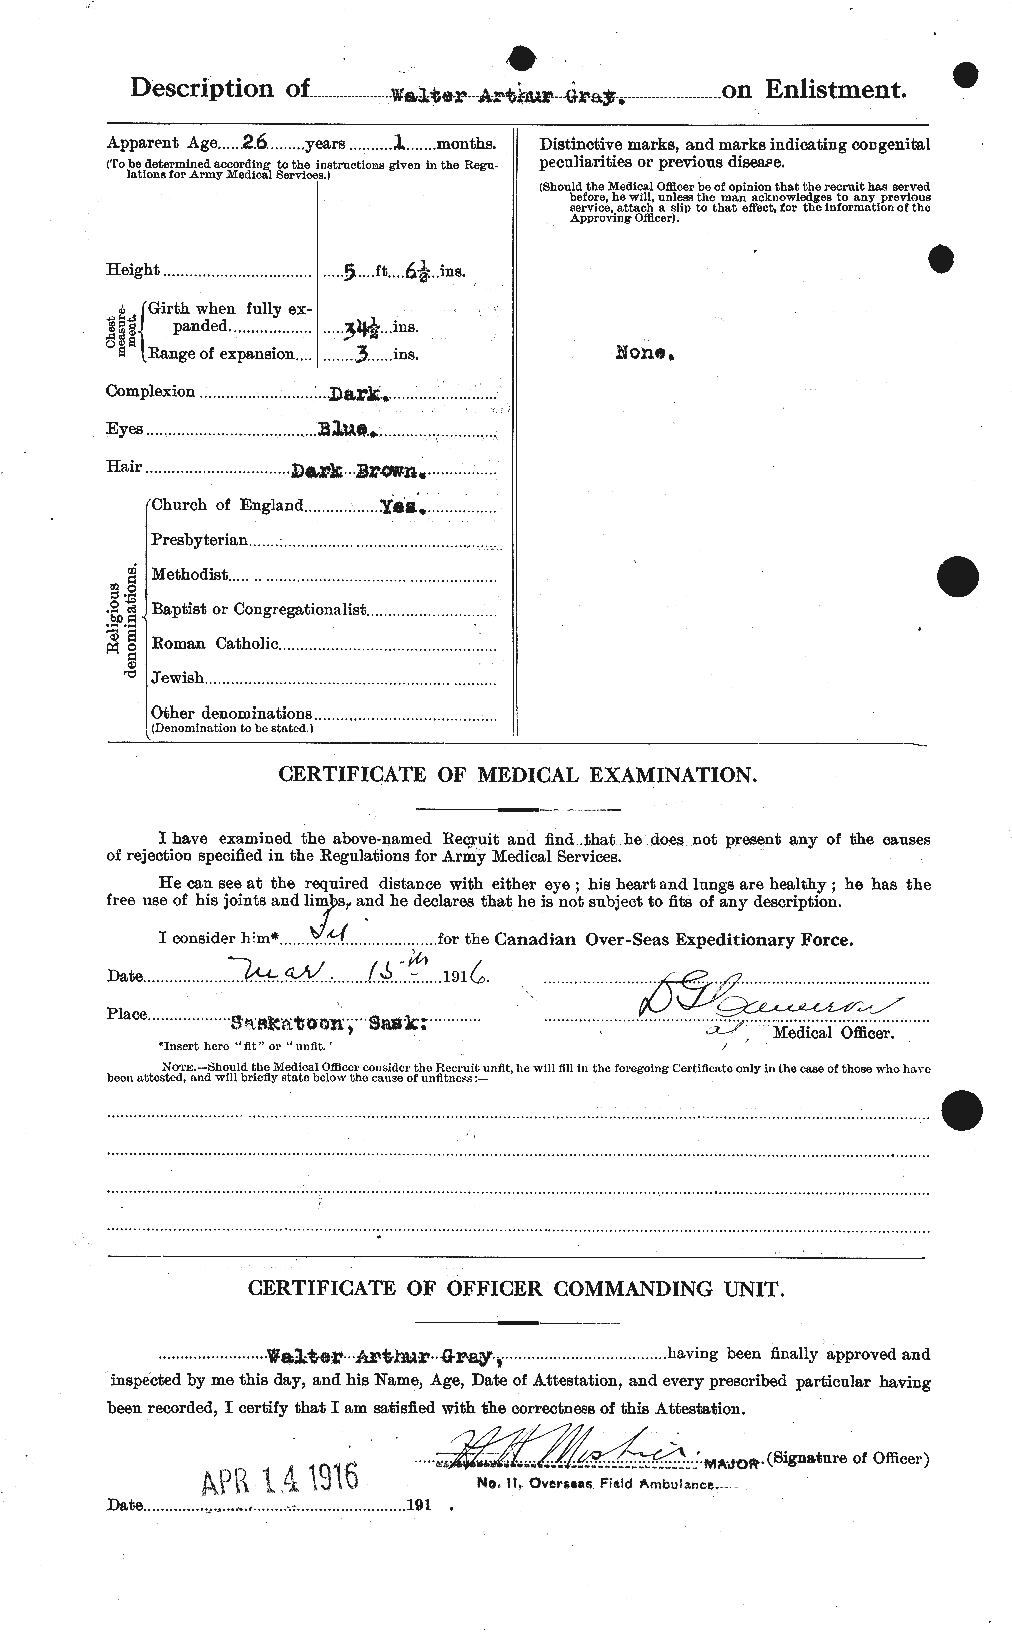 Personnel Records of the First World War - CEF 361741b